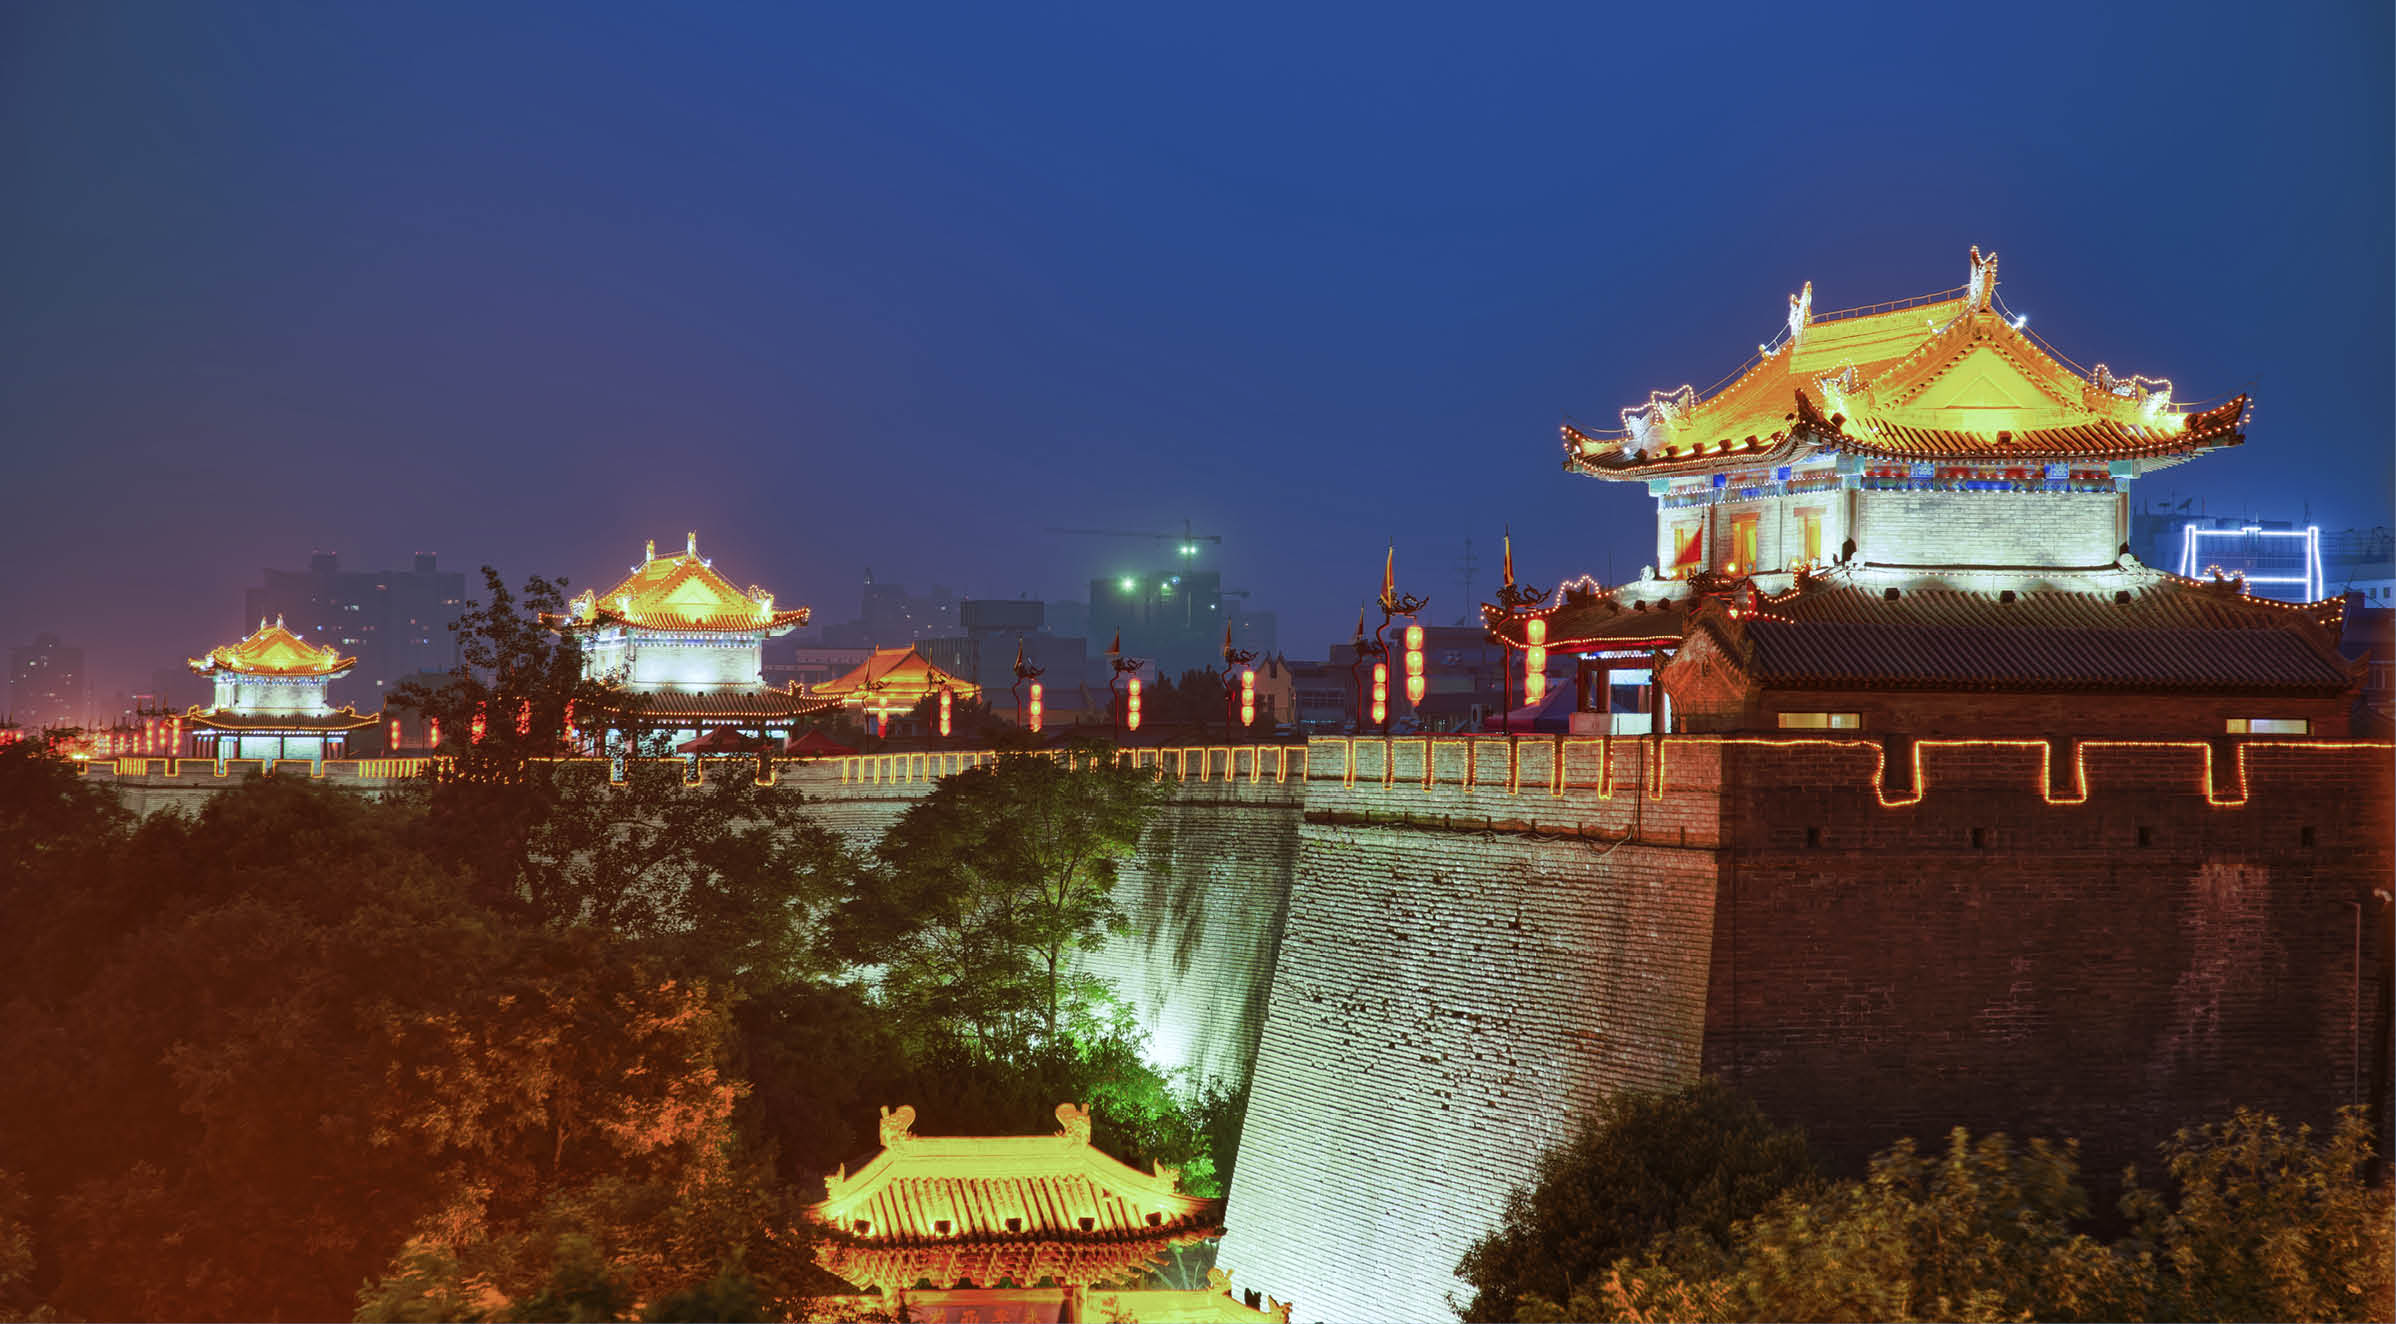 Xi'An City Wall is one of the best and oldest wall in China. It is 14km long, 12m high and 12-14m wide at the top. 